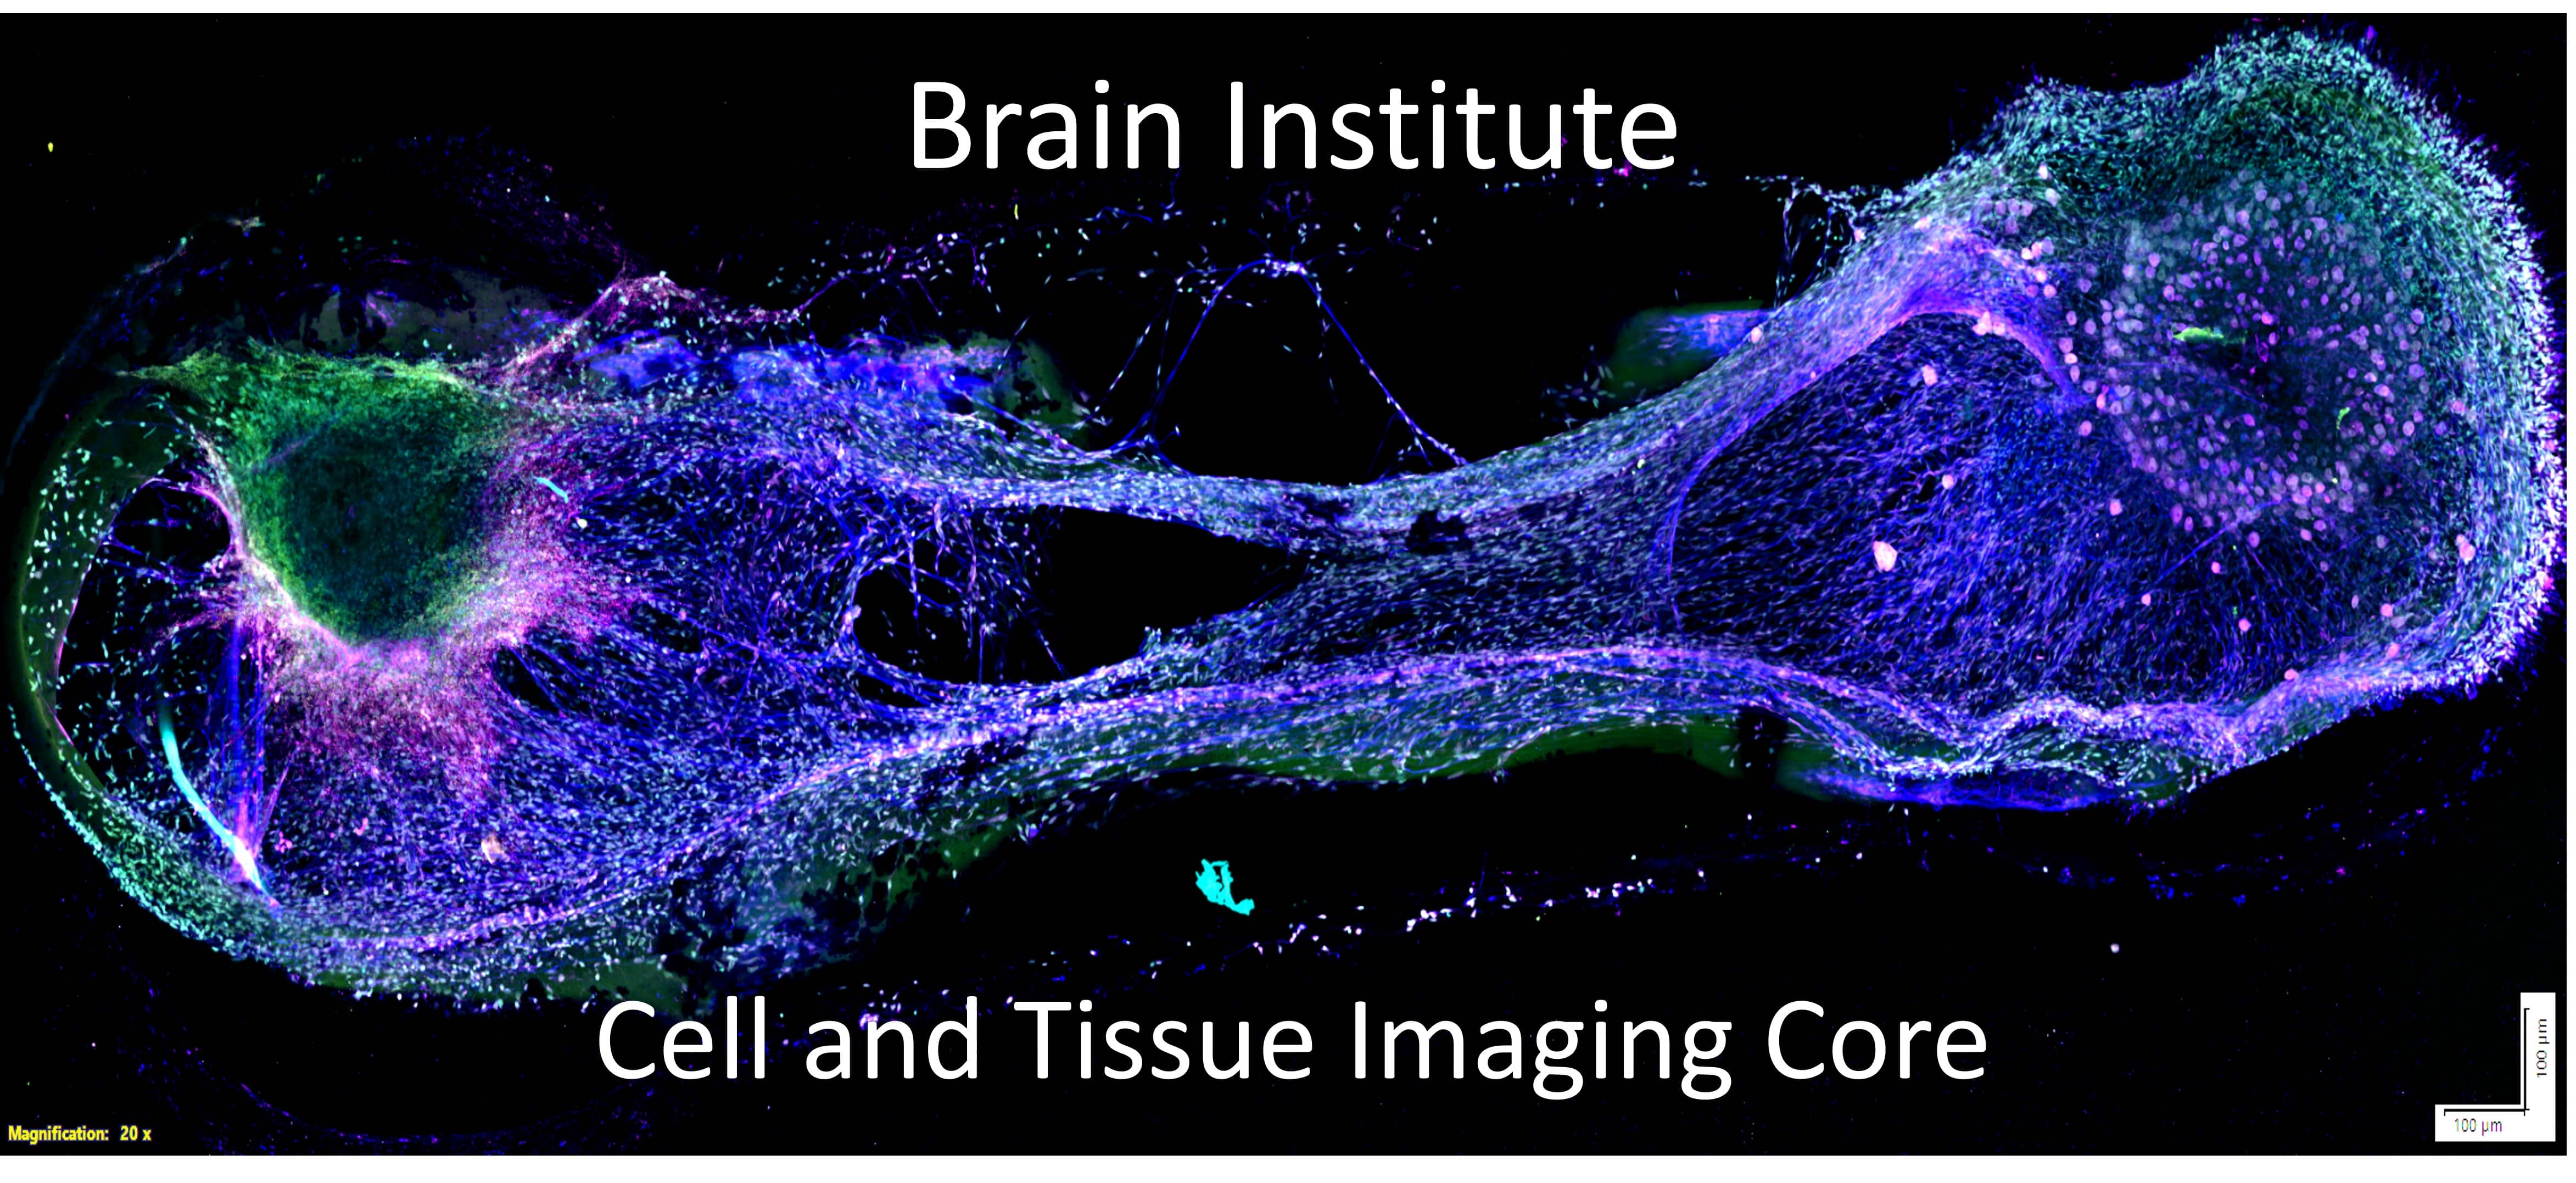 Cell and Tissue Imaging Core